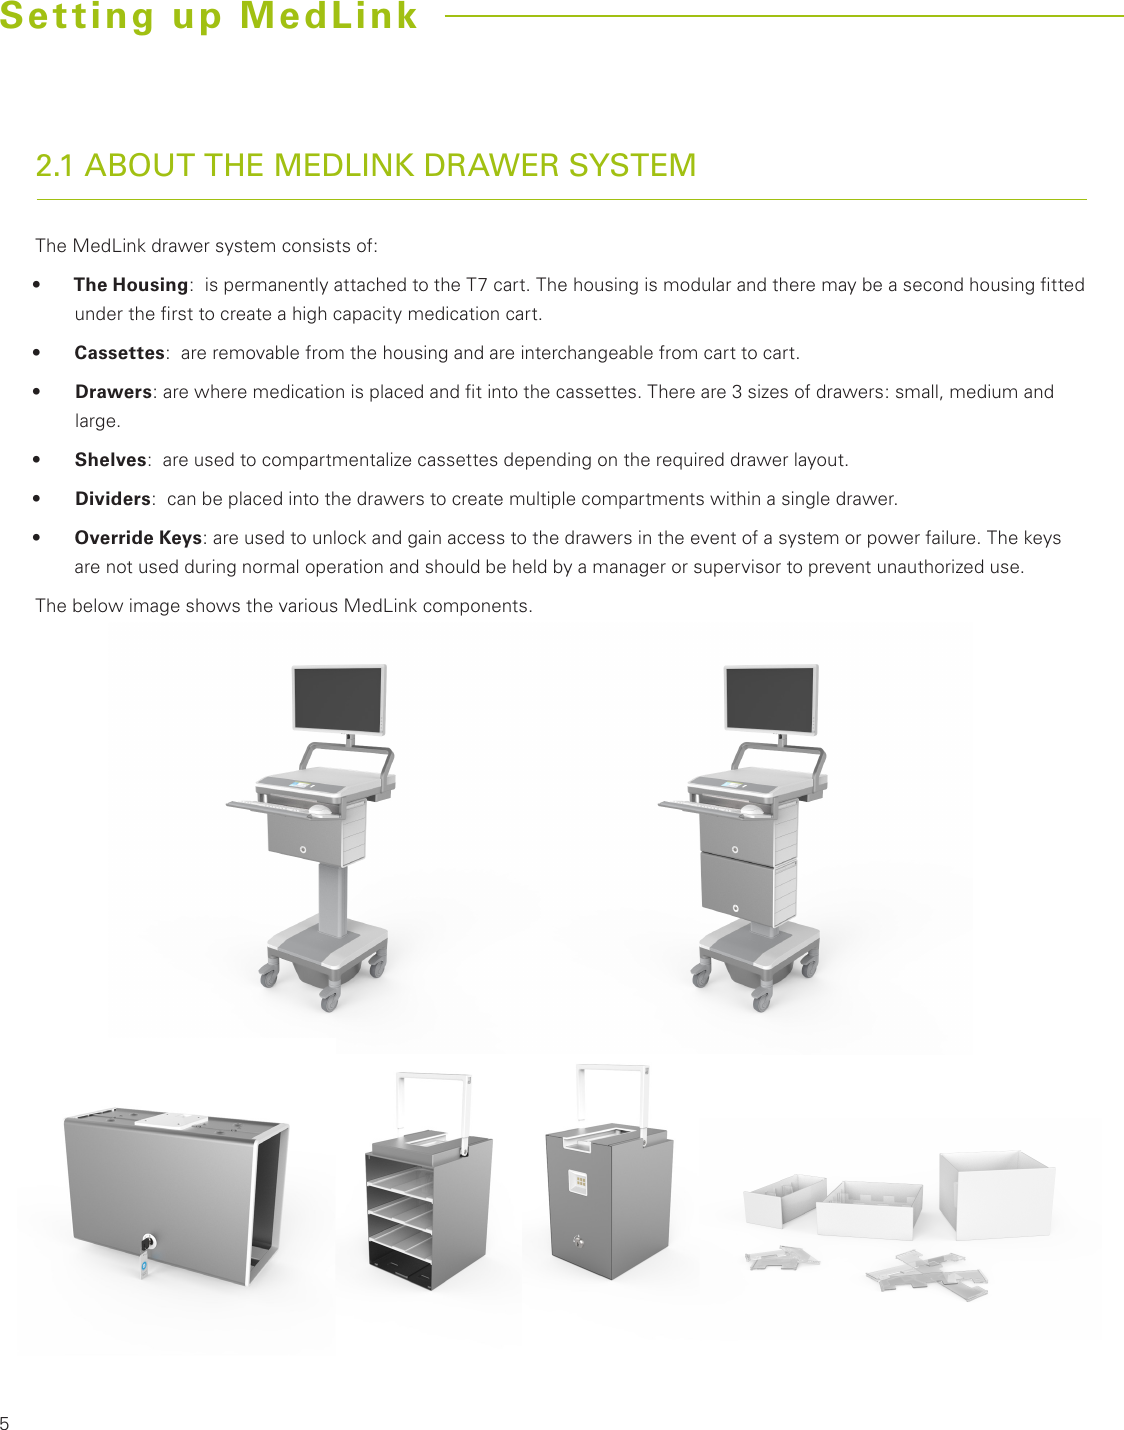 52.1 ABOUT THE MEDLINK DRAWER SYSTEMThe MedLink drawer system consists of:•  The Housing:  is permanently attached to the T7 cart. The housing is modular and there may be a second housing ﬁtted under the ﬁrst to create a high capacity medication cart.•  Cassettes:  are removable from the housing and are interchangeable from cart to cart.•  Drawers: are where medication is placed and ﬁt into the cassettes. There are 3 sizes of drawers: small, medium and large.•  Shelves:  are used to compartmentalize cassettes depending on the required drawer layout.•  Dividers:  can be placed into the drawers to create multiple compartments within a single drawer. •  Override Keys: are used to unlock and gain access to the drawers in the event of a system or power failure. The keys are not used during normal operation and should be held by a manager or supervisor to prevent unauthorized use.The below image shows the various MedLink components.Setting up MedLink